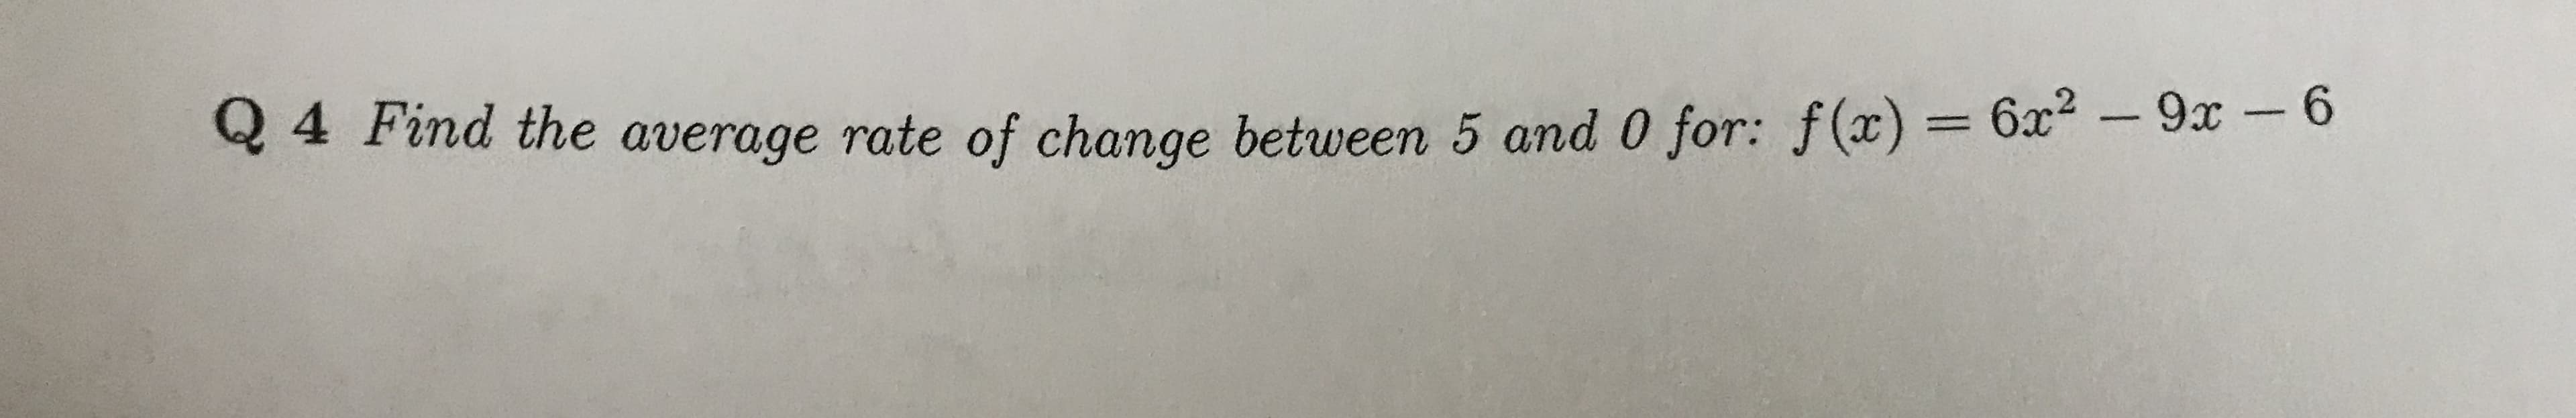 Q 4 Find the average rate of change between 5 and 0 for: f(x) = 6x2 -9x - 6
